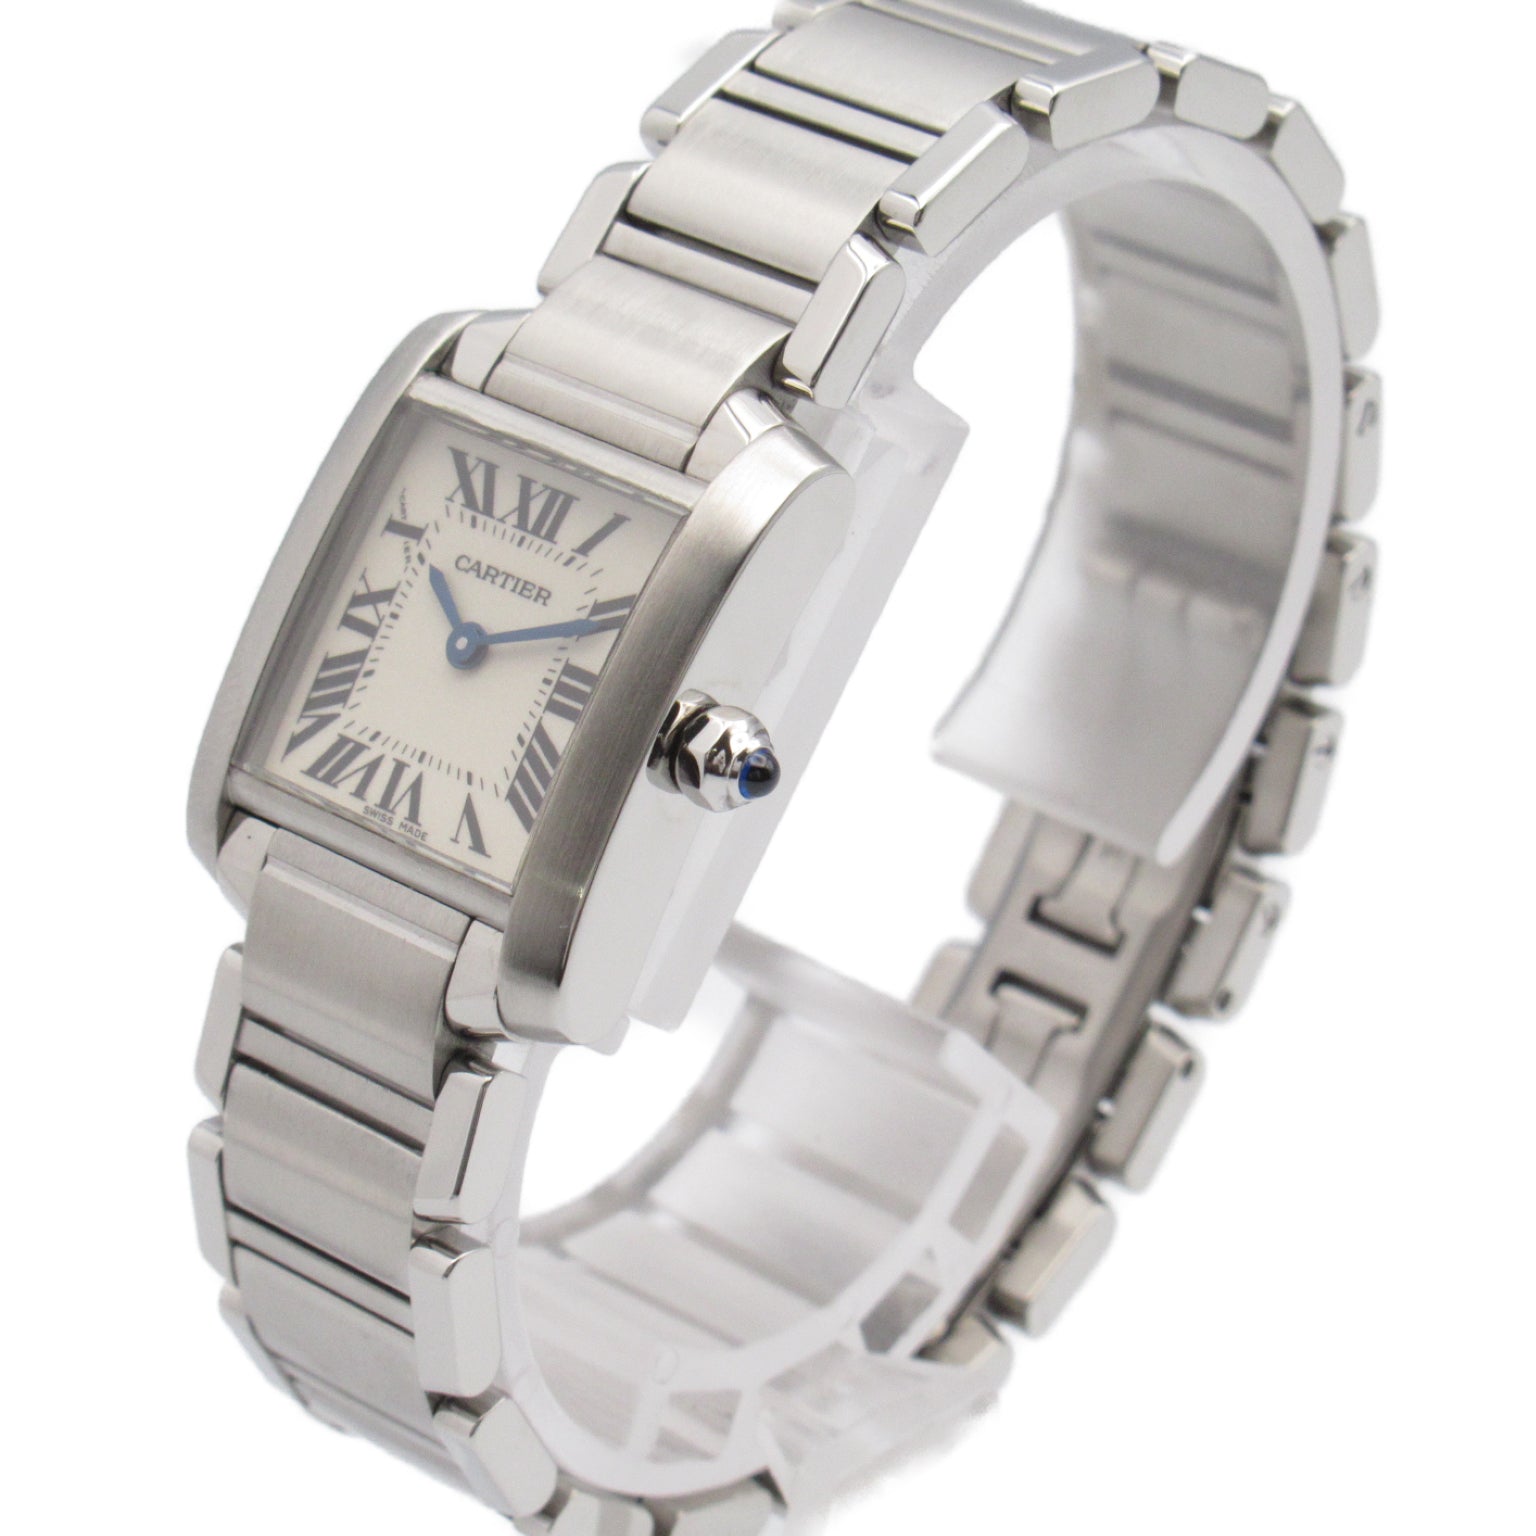 Cartier Cartier Tanks France SM Watch Stainless Steel  Ivory W51008Q3